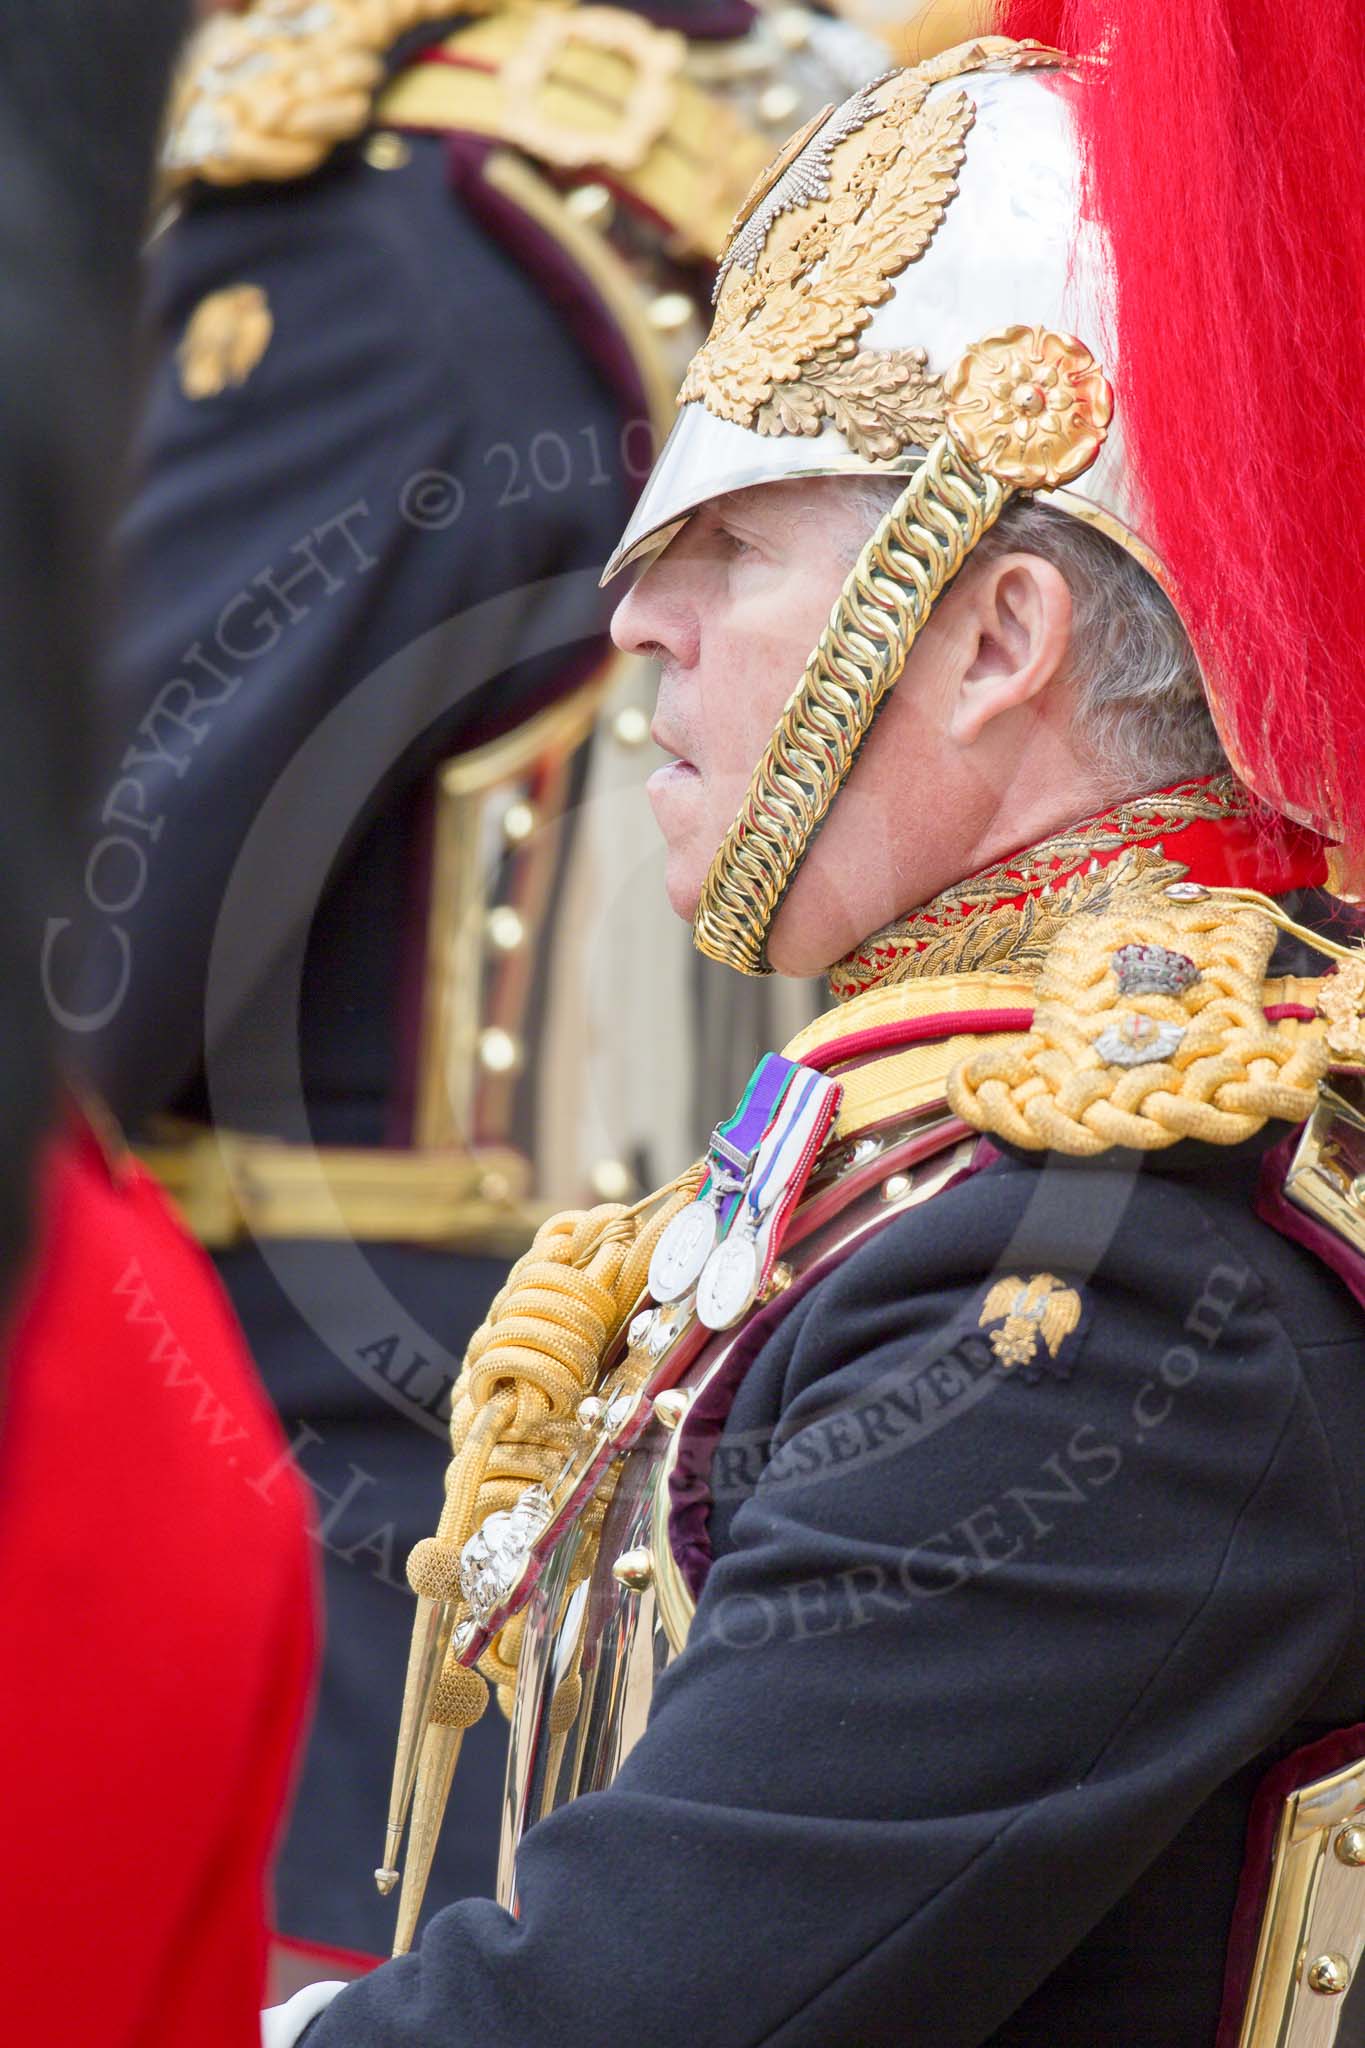 Trooping the Colour 2010: Colonel T W Browne, The Blues and Royals, Silver Stick in Waiting. Lots of detail in this photo.

Horse Guards Parade is beautifully reflected in the rear shield of his uniform (please correct me if &quot;rear shield&quot; is the wrong phrase!)..
Horse Guards Parade, Westminster,
London SW1,
Greater London,
United Kingdom,
on 12 June 2010 at 11:16, image #119